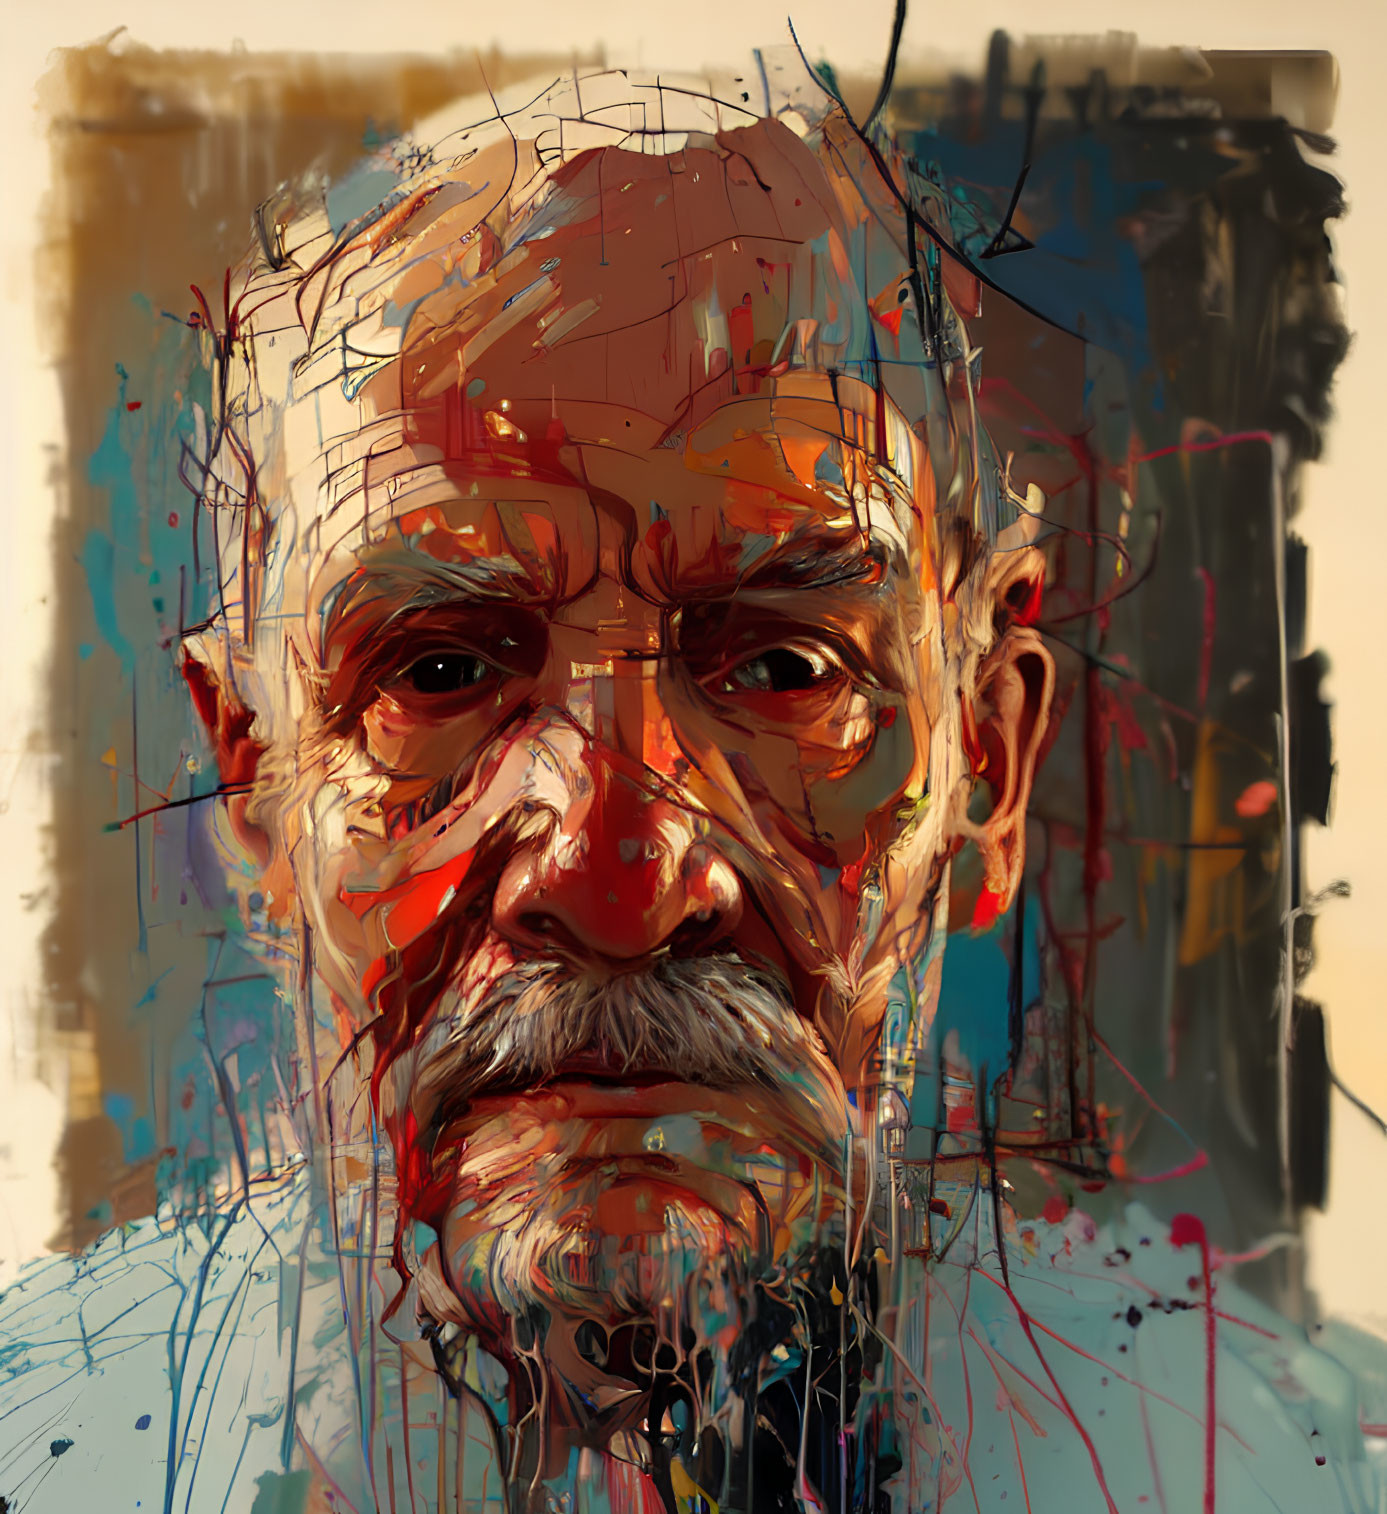 Colorful abstract portrait of an elderly man with expressive eyes and beard